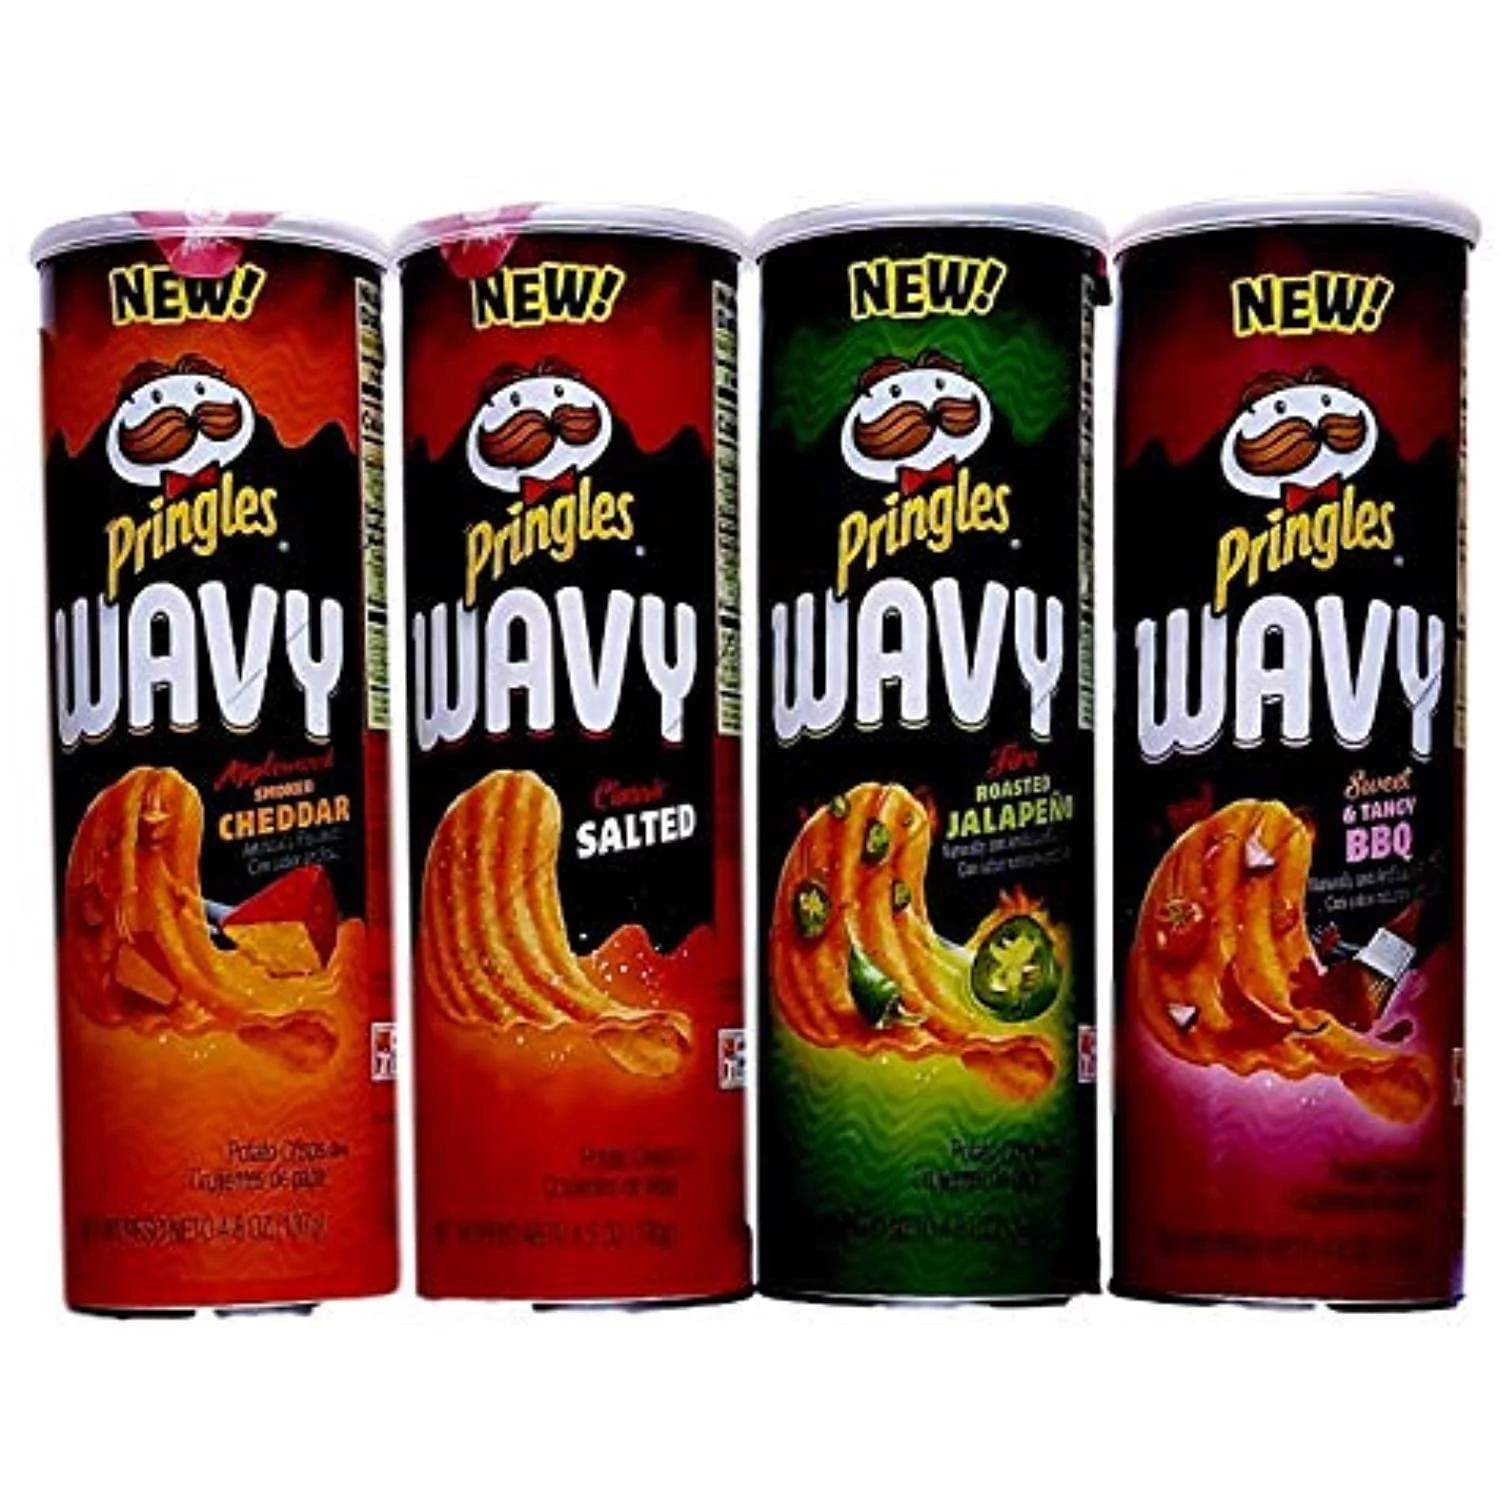 pringles wavy applewood smoked cheddar - How many carbs are in cheddar Pringles